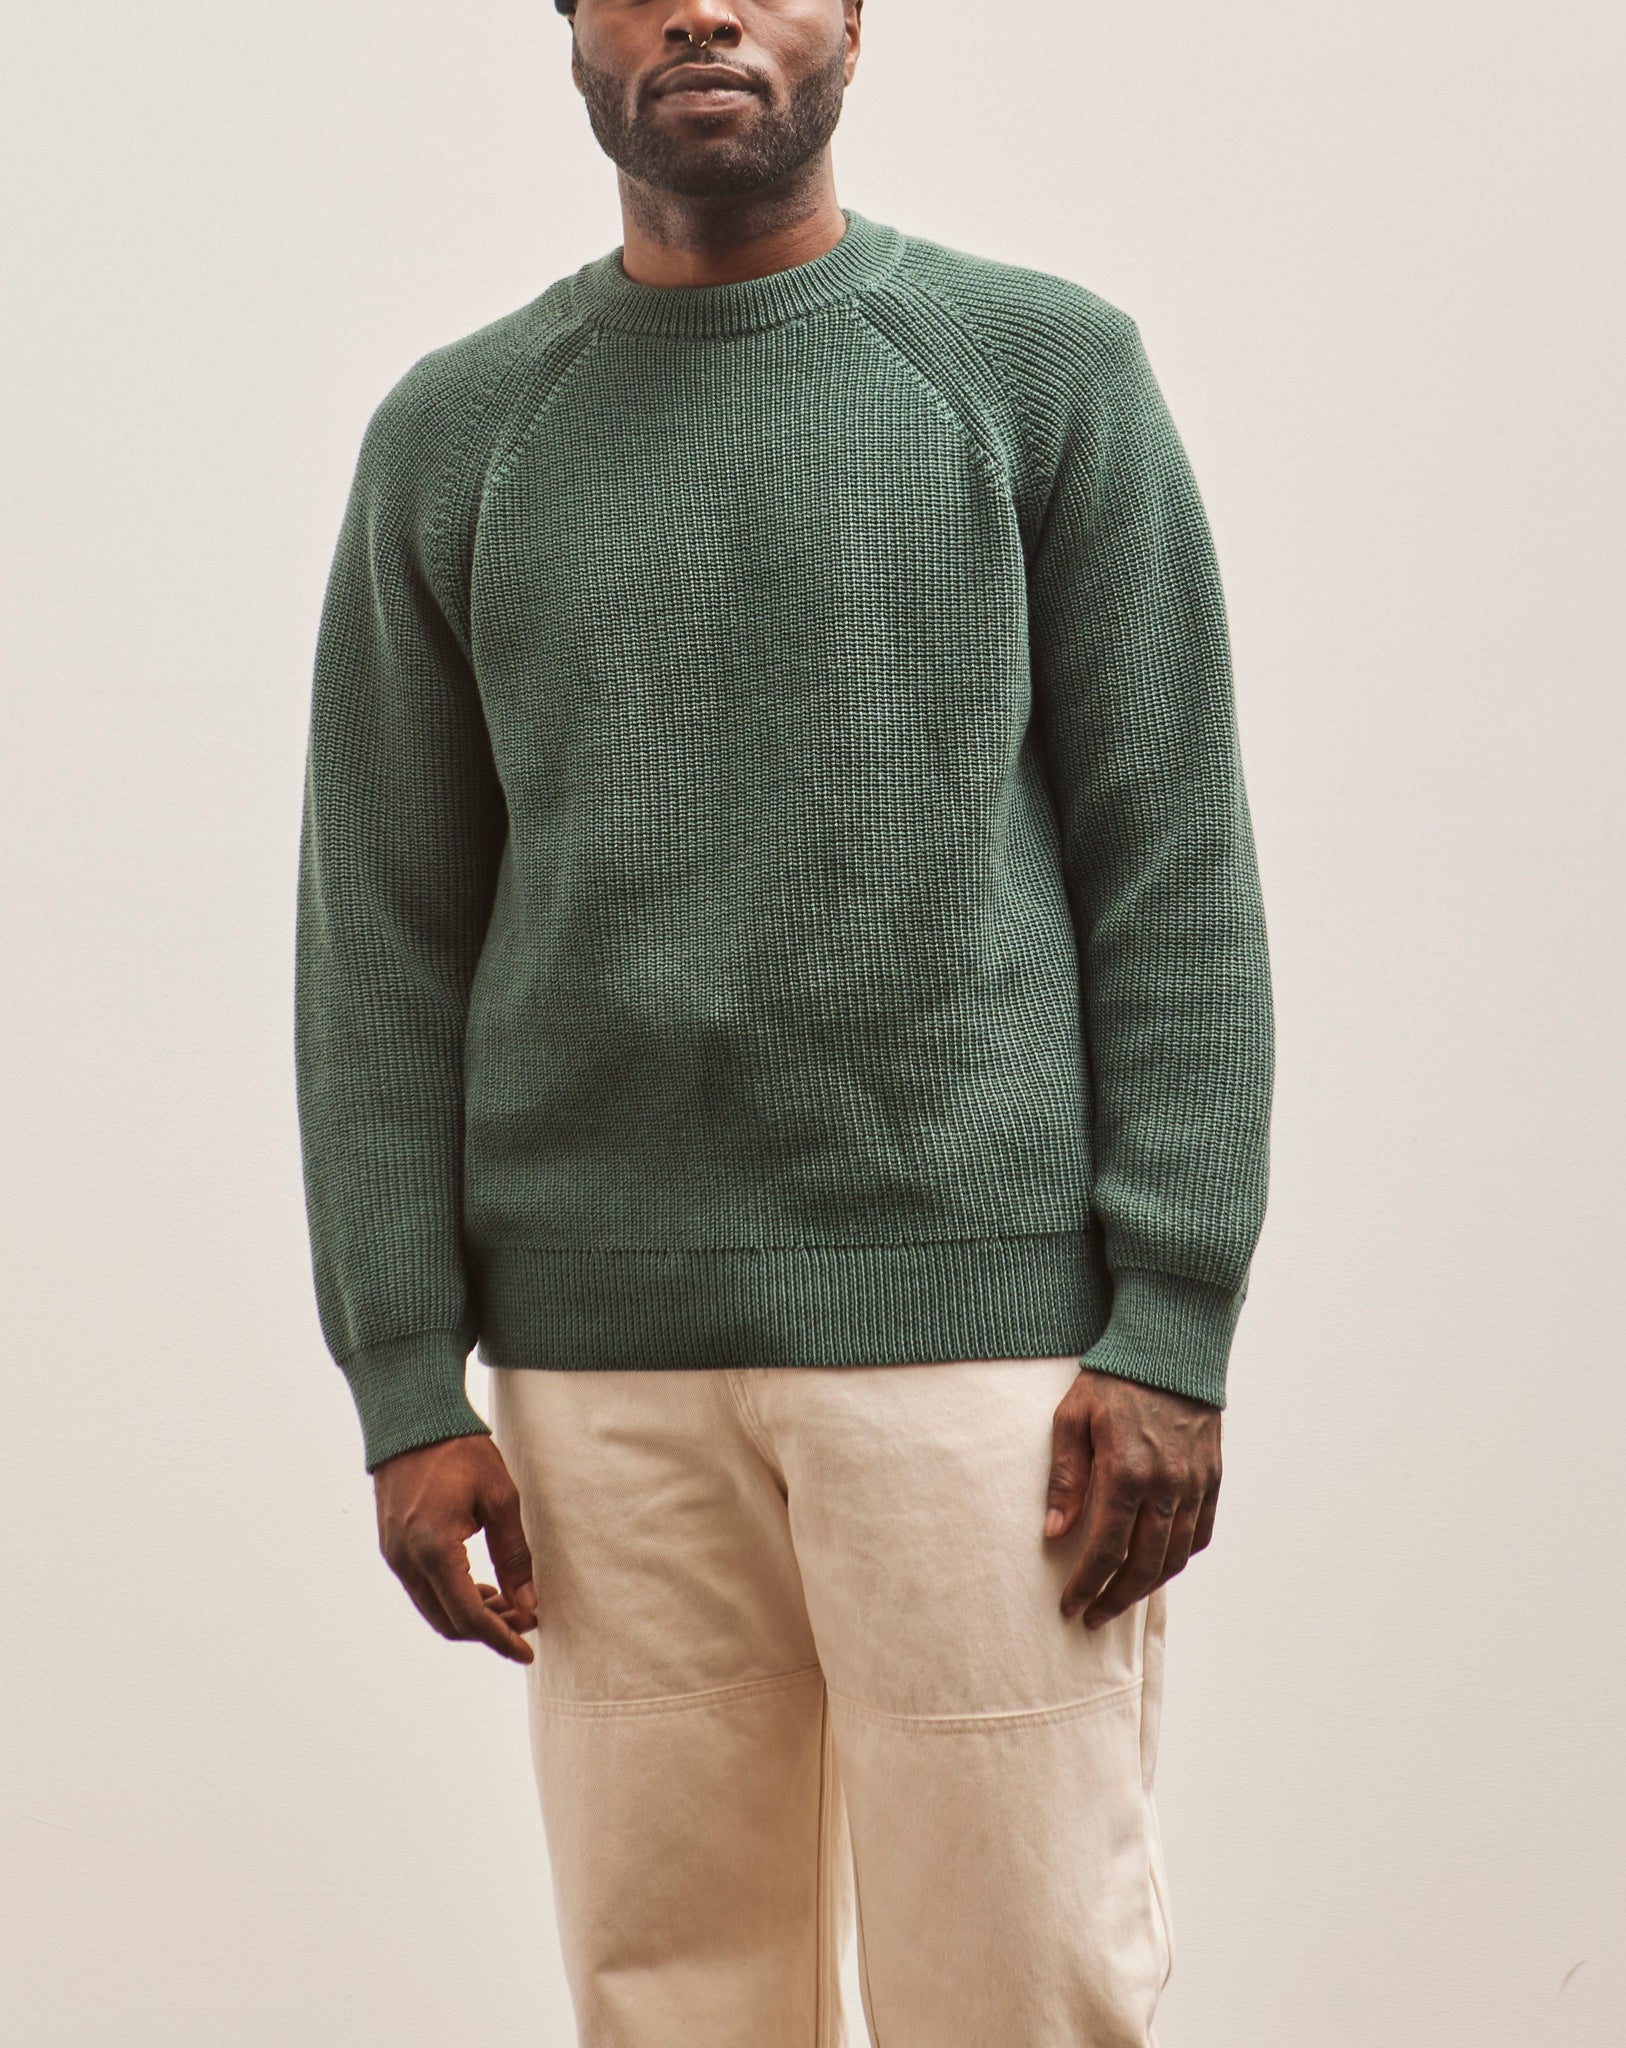 Green Seamless Sweater by Universal Works on Sale